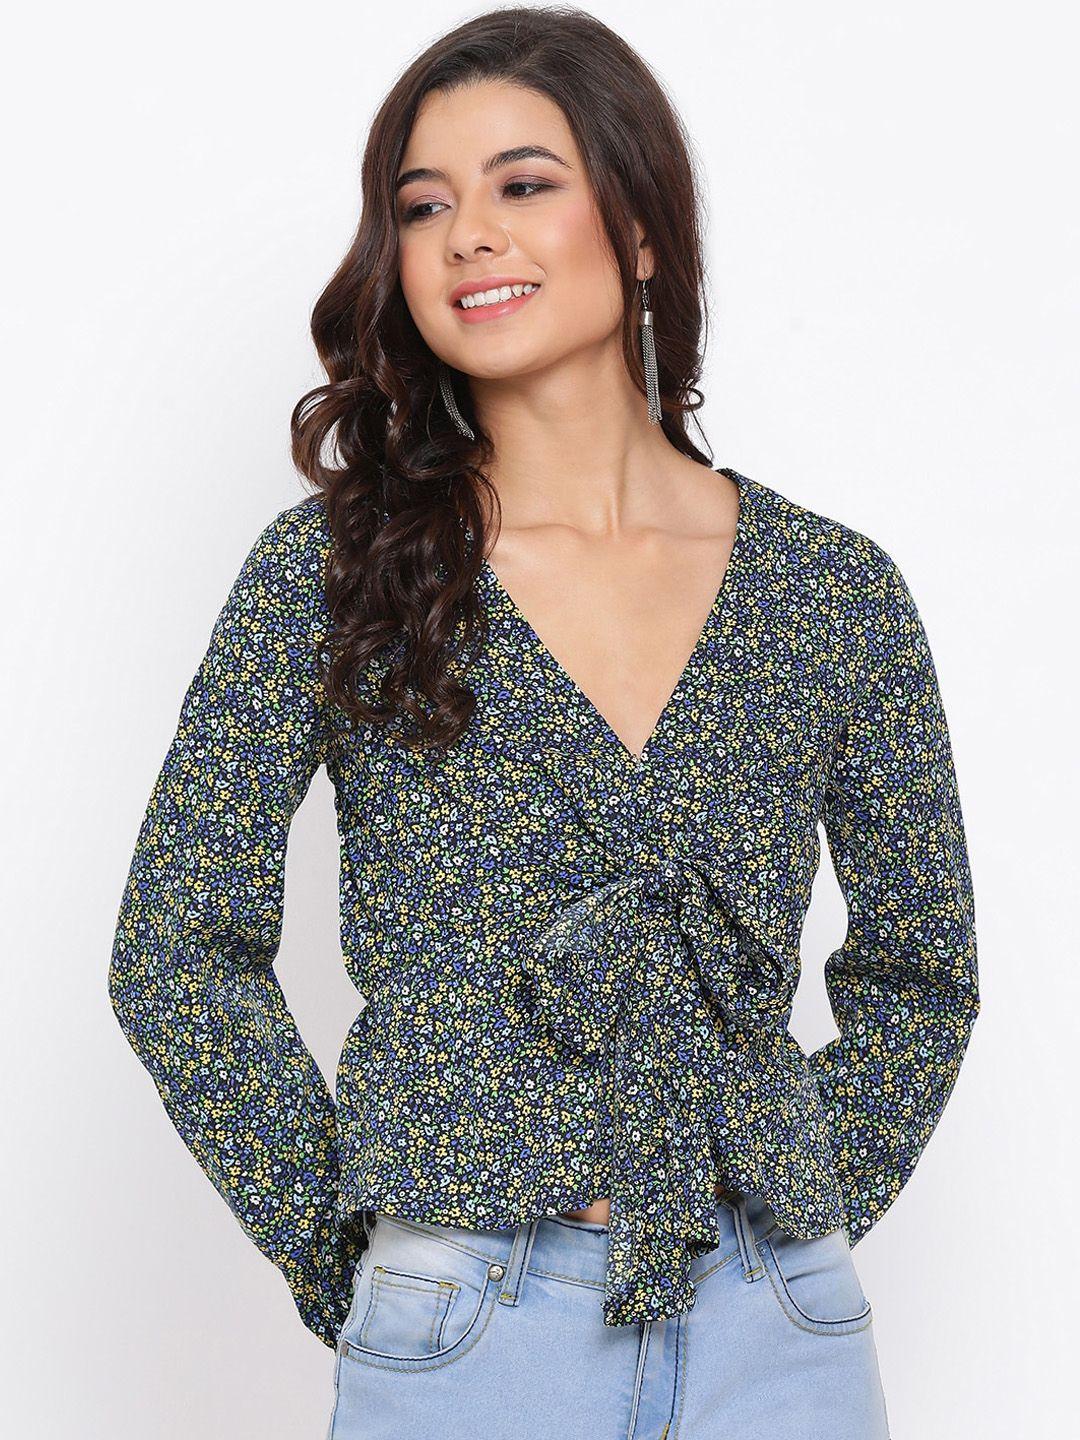 oxolloxo-women-green-&-yellow-floral-printed-wrap-top